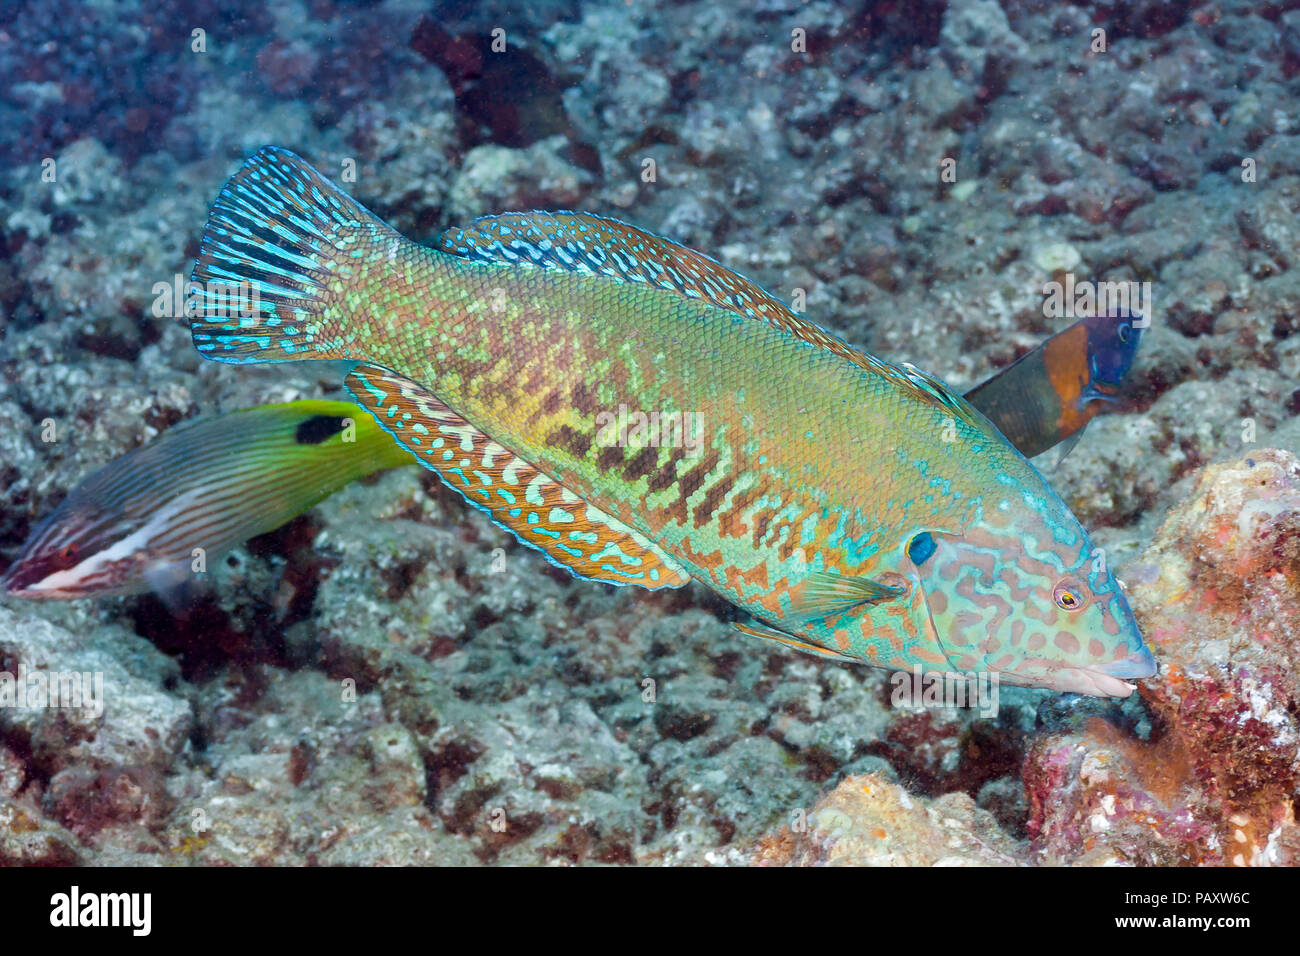 Endemic to the Hawaiian Islands, the yellowstripe coris or wrasse, Coris flavovittata, can reach 20 inches in length in it’s terminal phase, as it is  Stock Photo